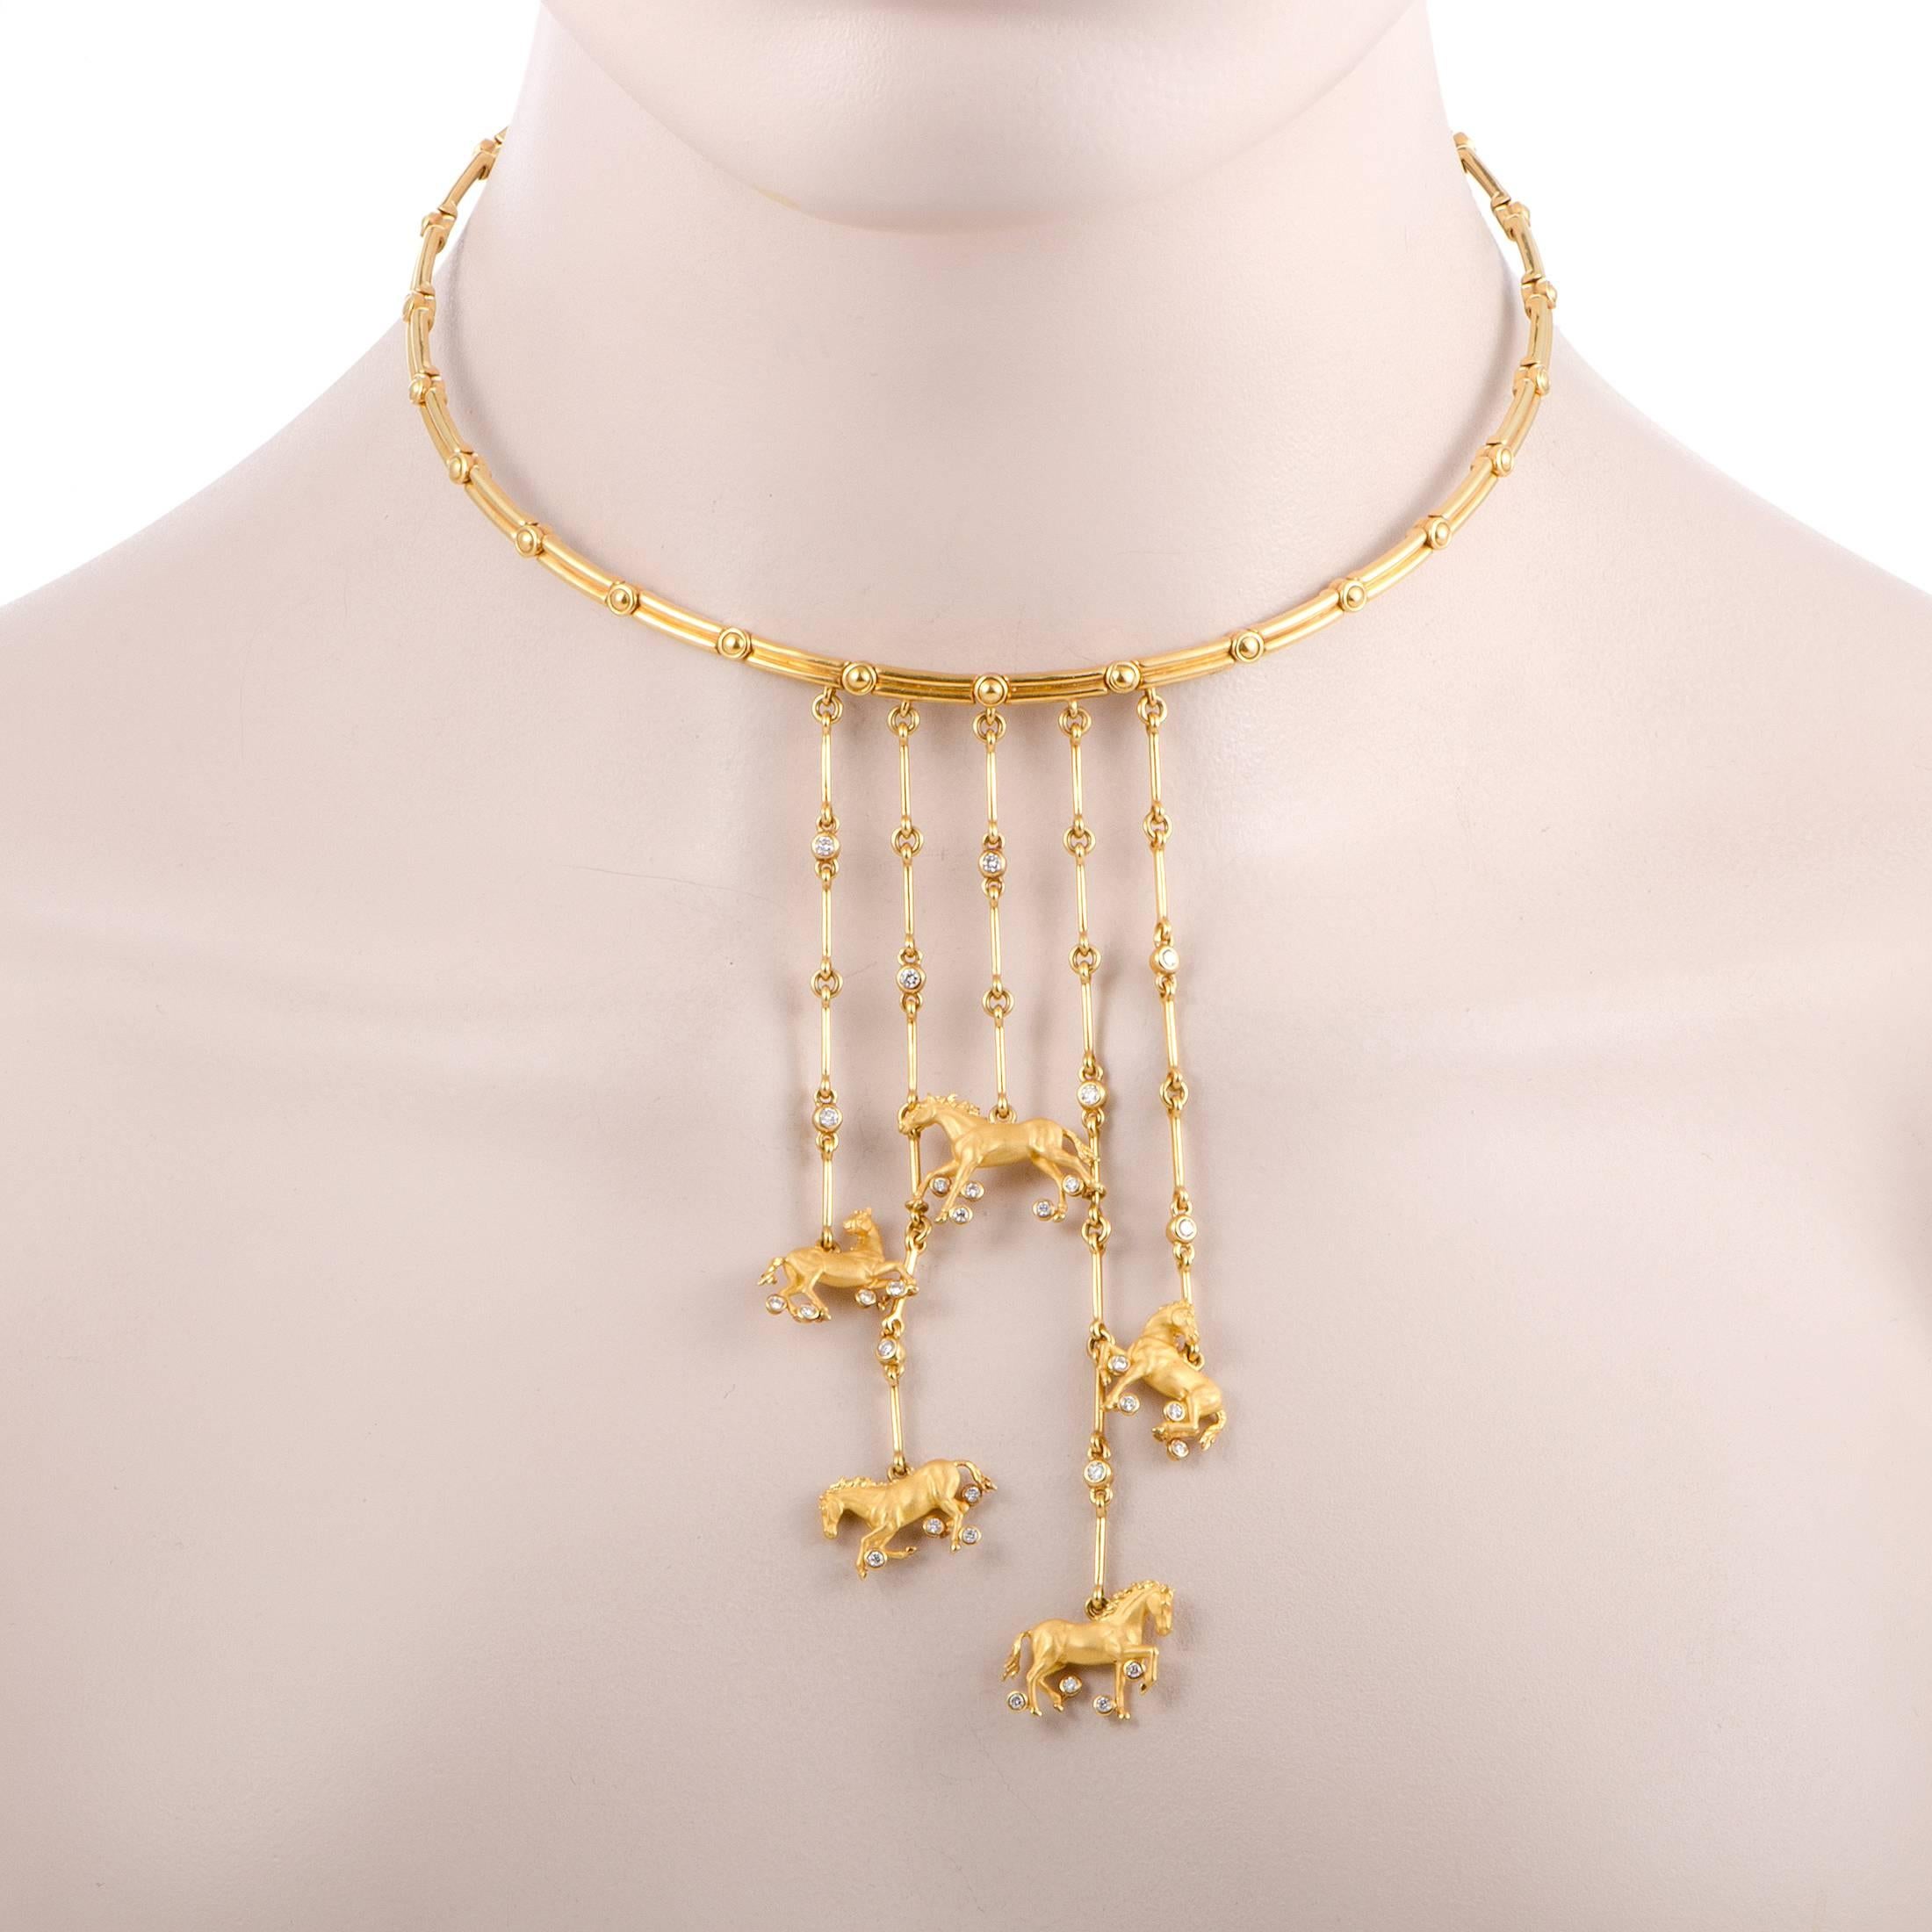 This Carrera y Carrera's Ecuestre collection necklace perfectly resonates with plunging necklines. Crafted from 18K yellow gold and accented with 0.98 carats of diamonds, it brings your ensemble a sparkling touch of country flair infused with